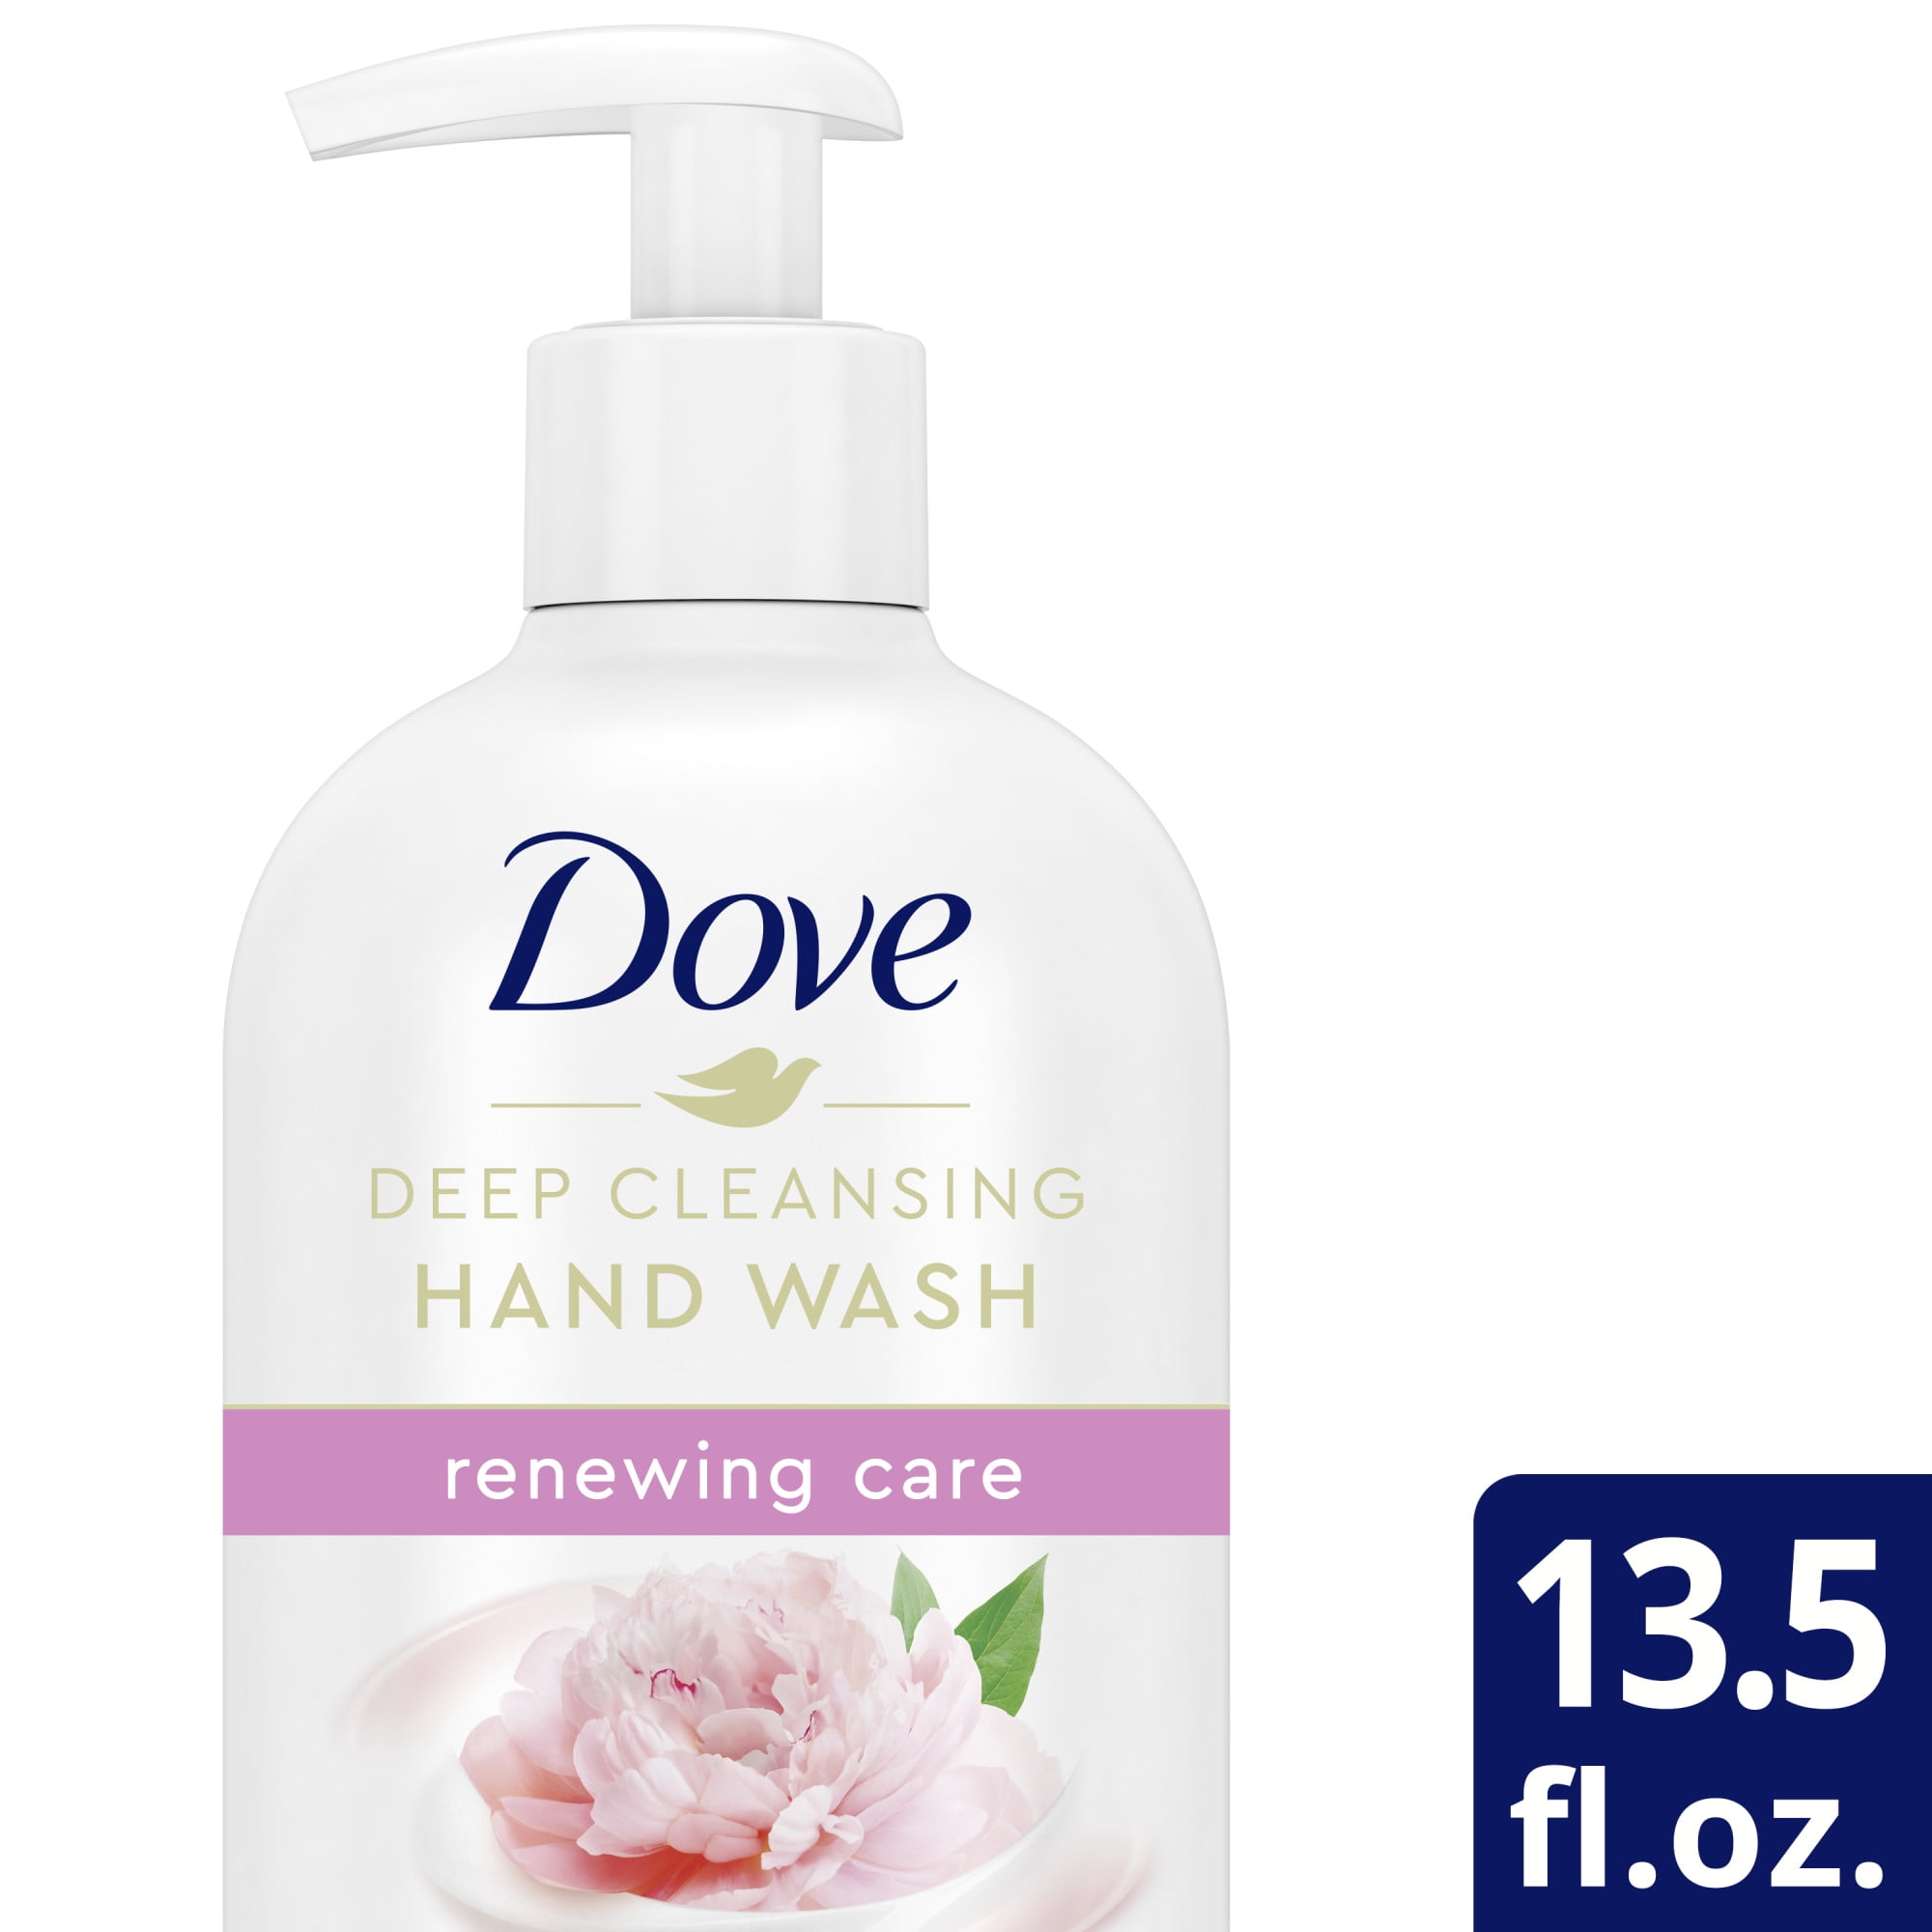 Dove Renewing Care Peony & Rose Oil Deep Cleansing Hand Wash 13.5 fl oz